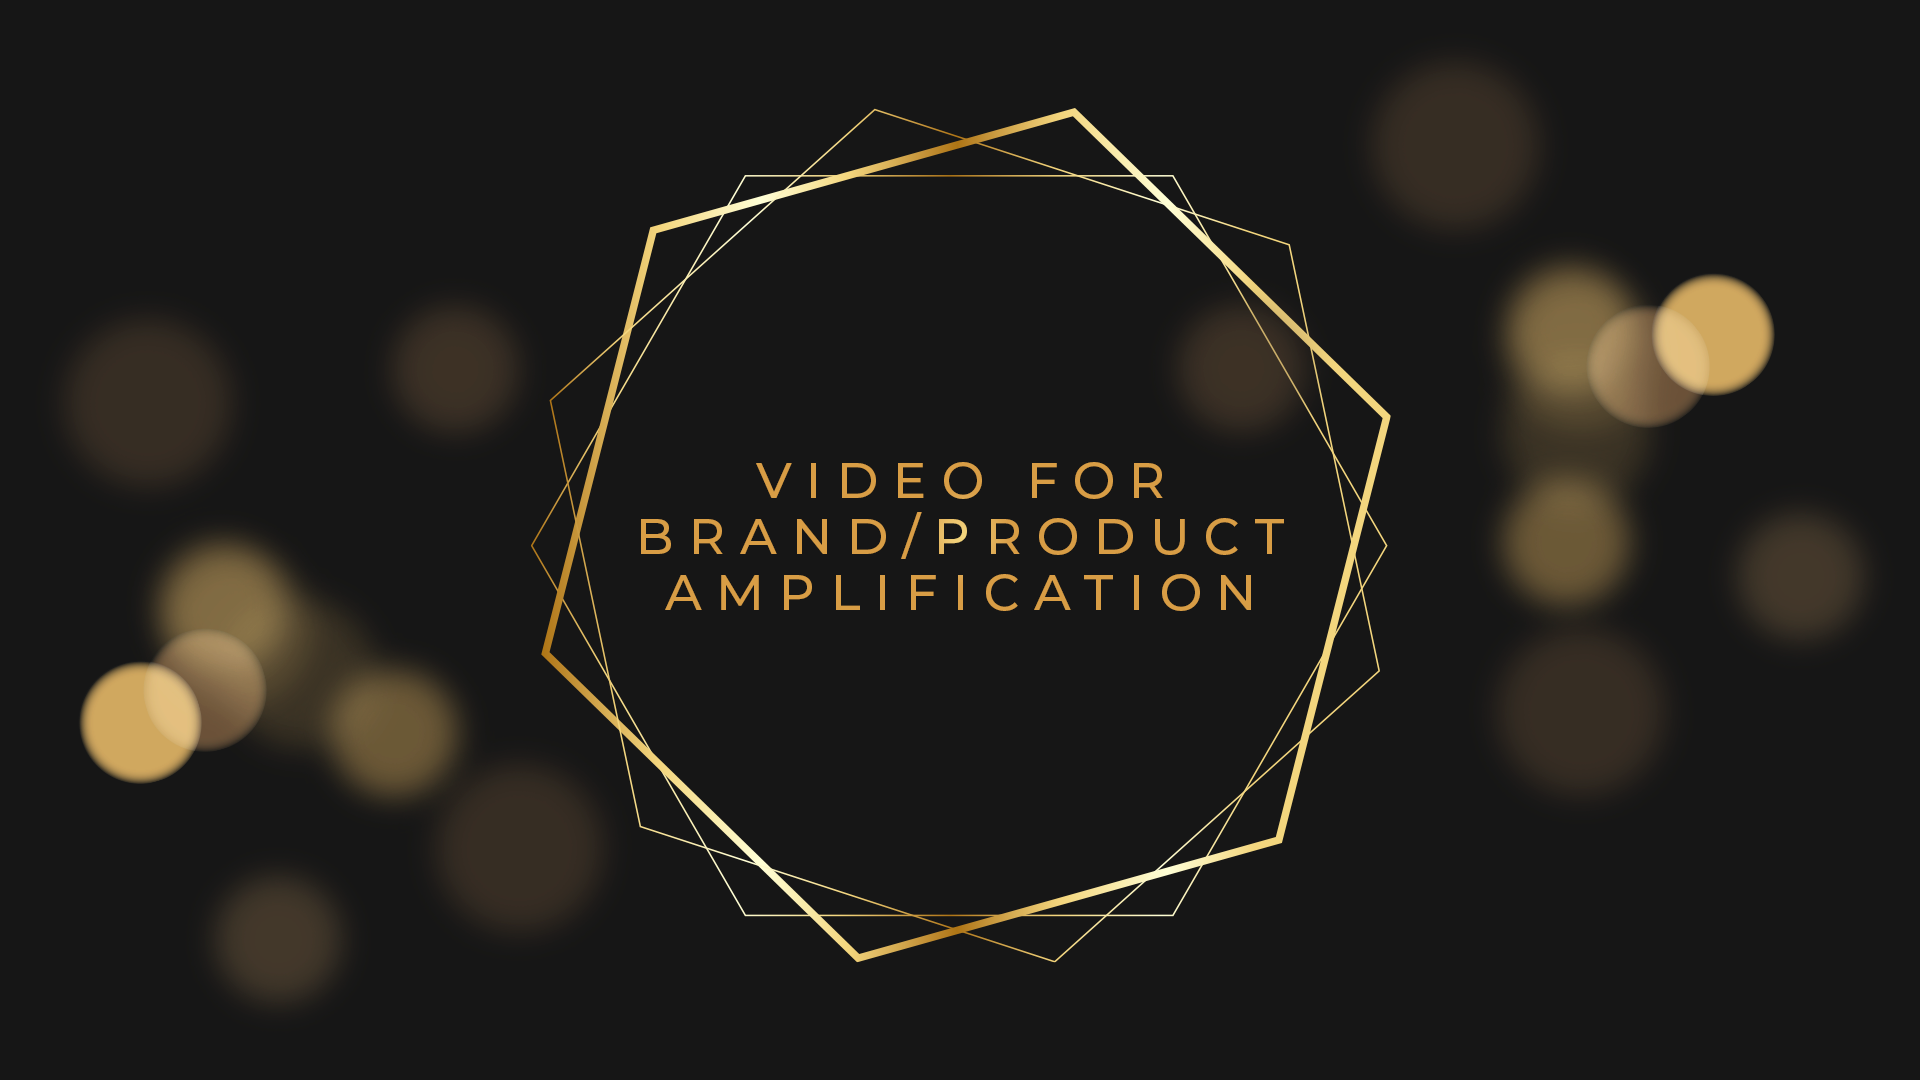 Video for Brand/Product Amplification